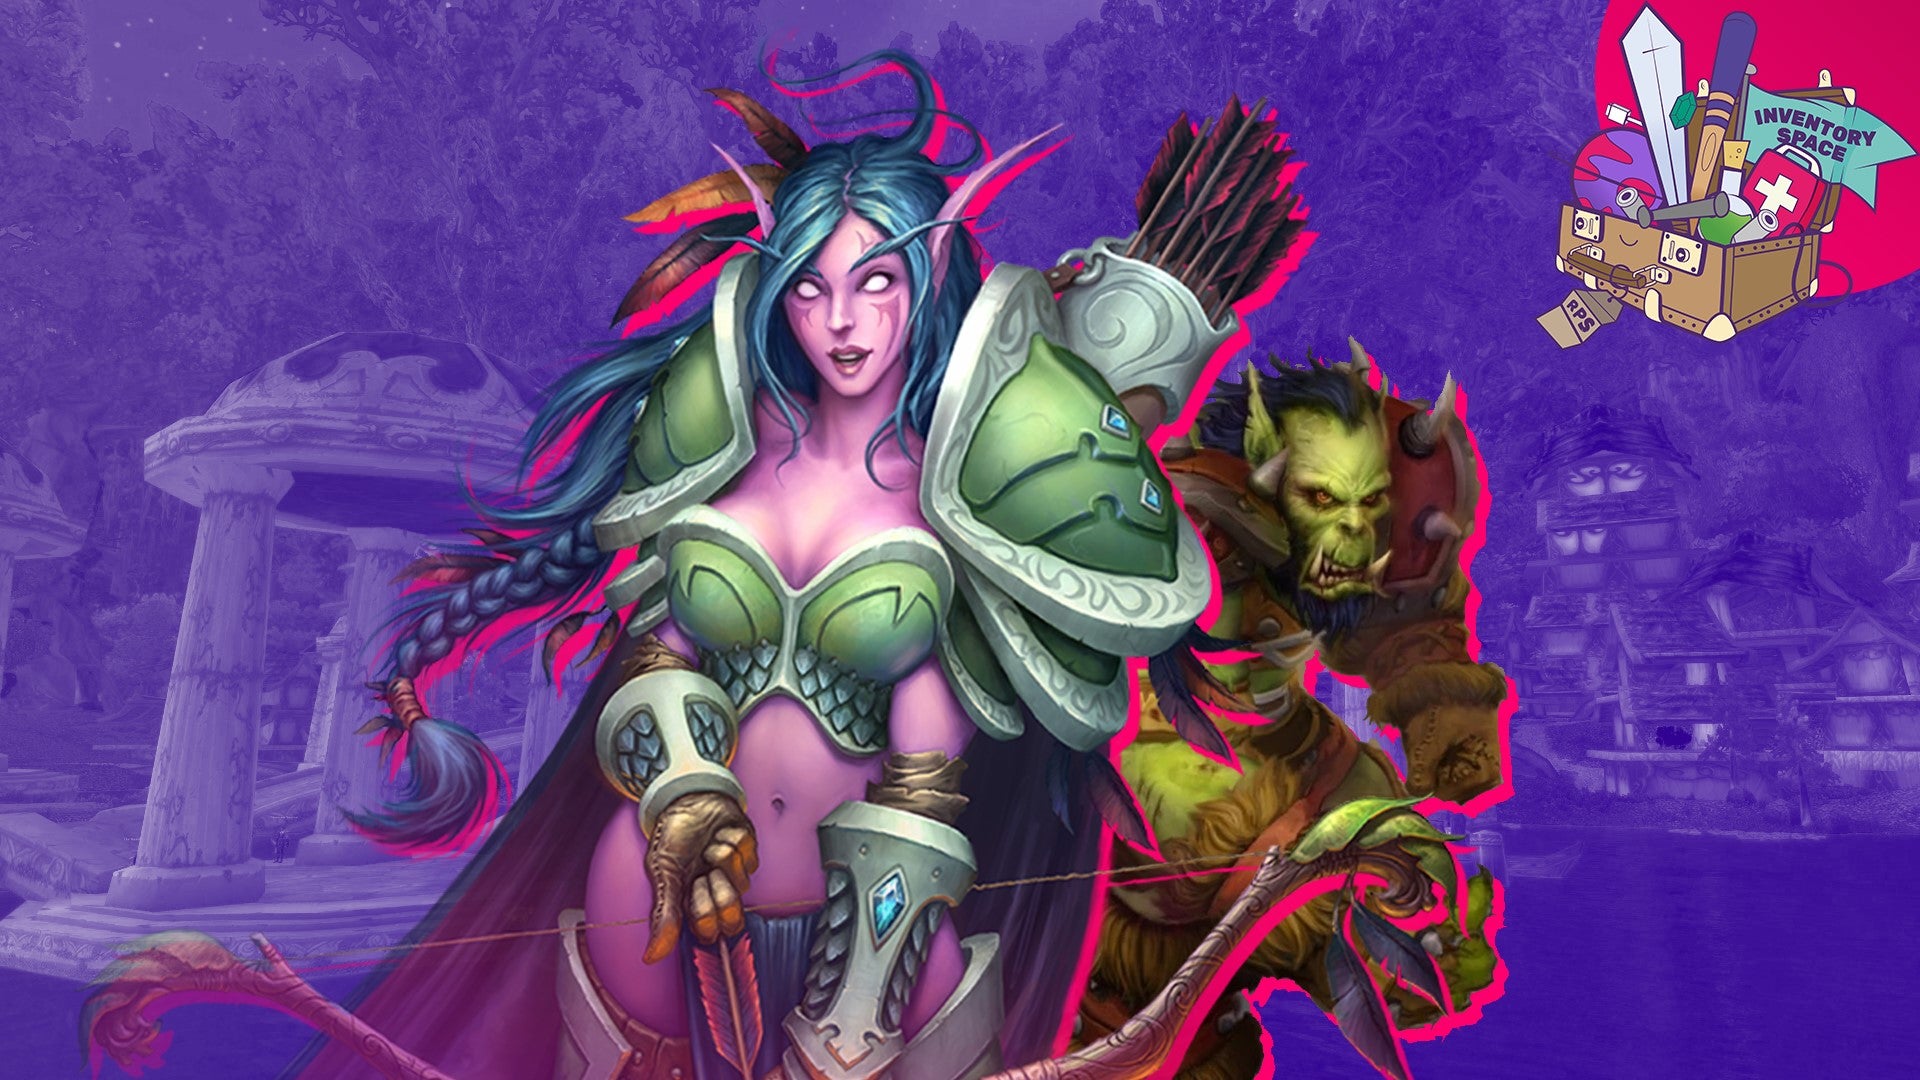 A header for the World Of Warcraft episode of Inventory Space, which has the IS logo in the top right corner and a Night Elf archer and Orc at its centre.